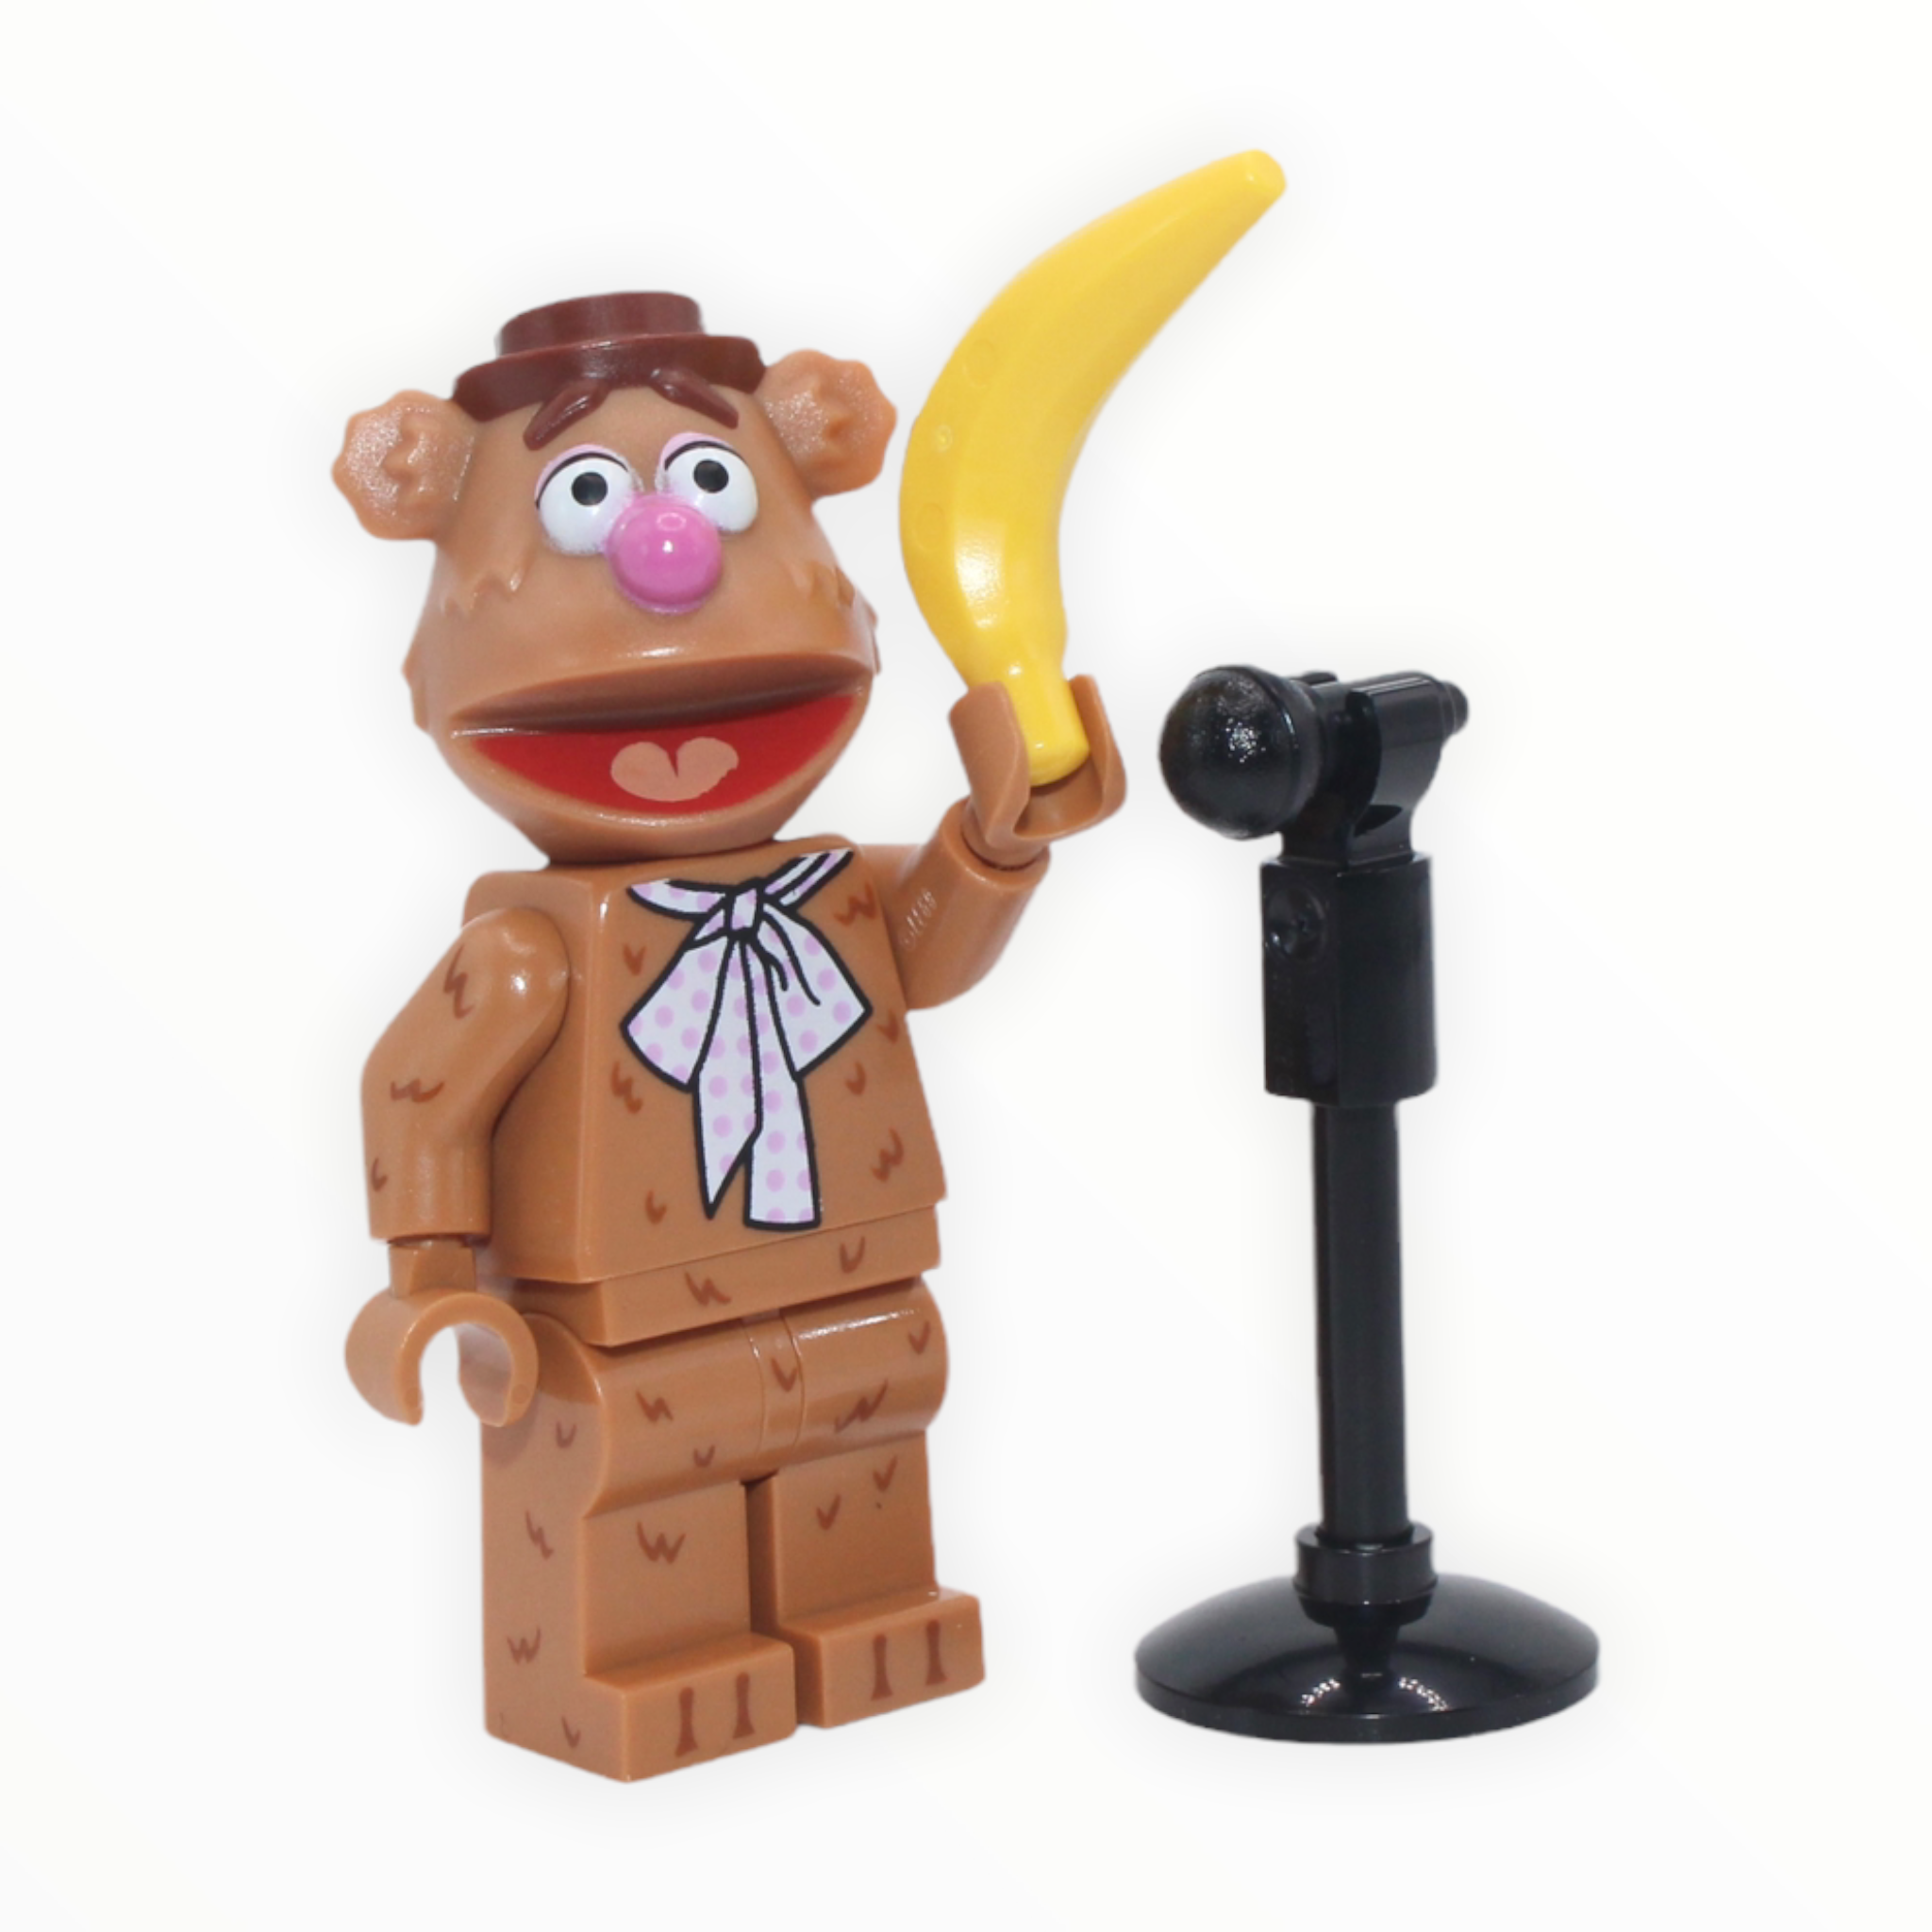 The Muppets Series: Fozzie Bear